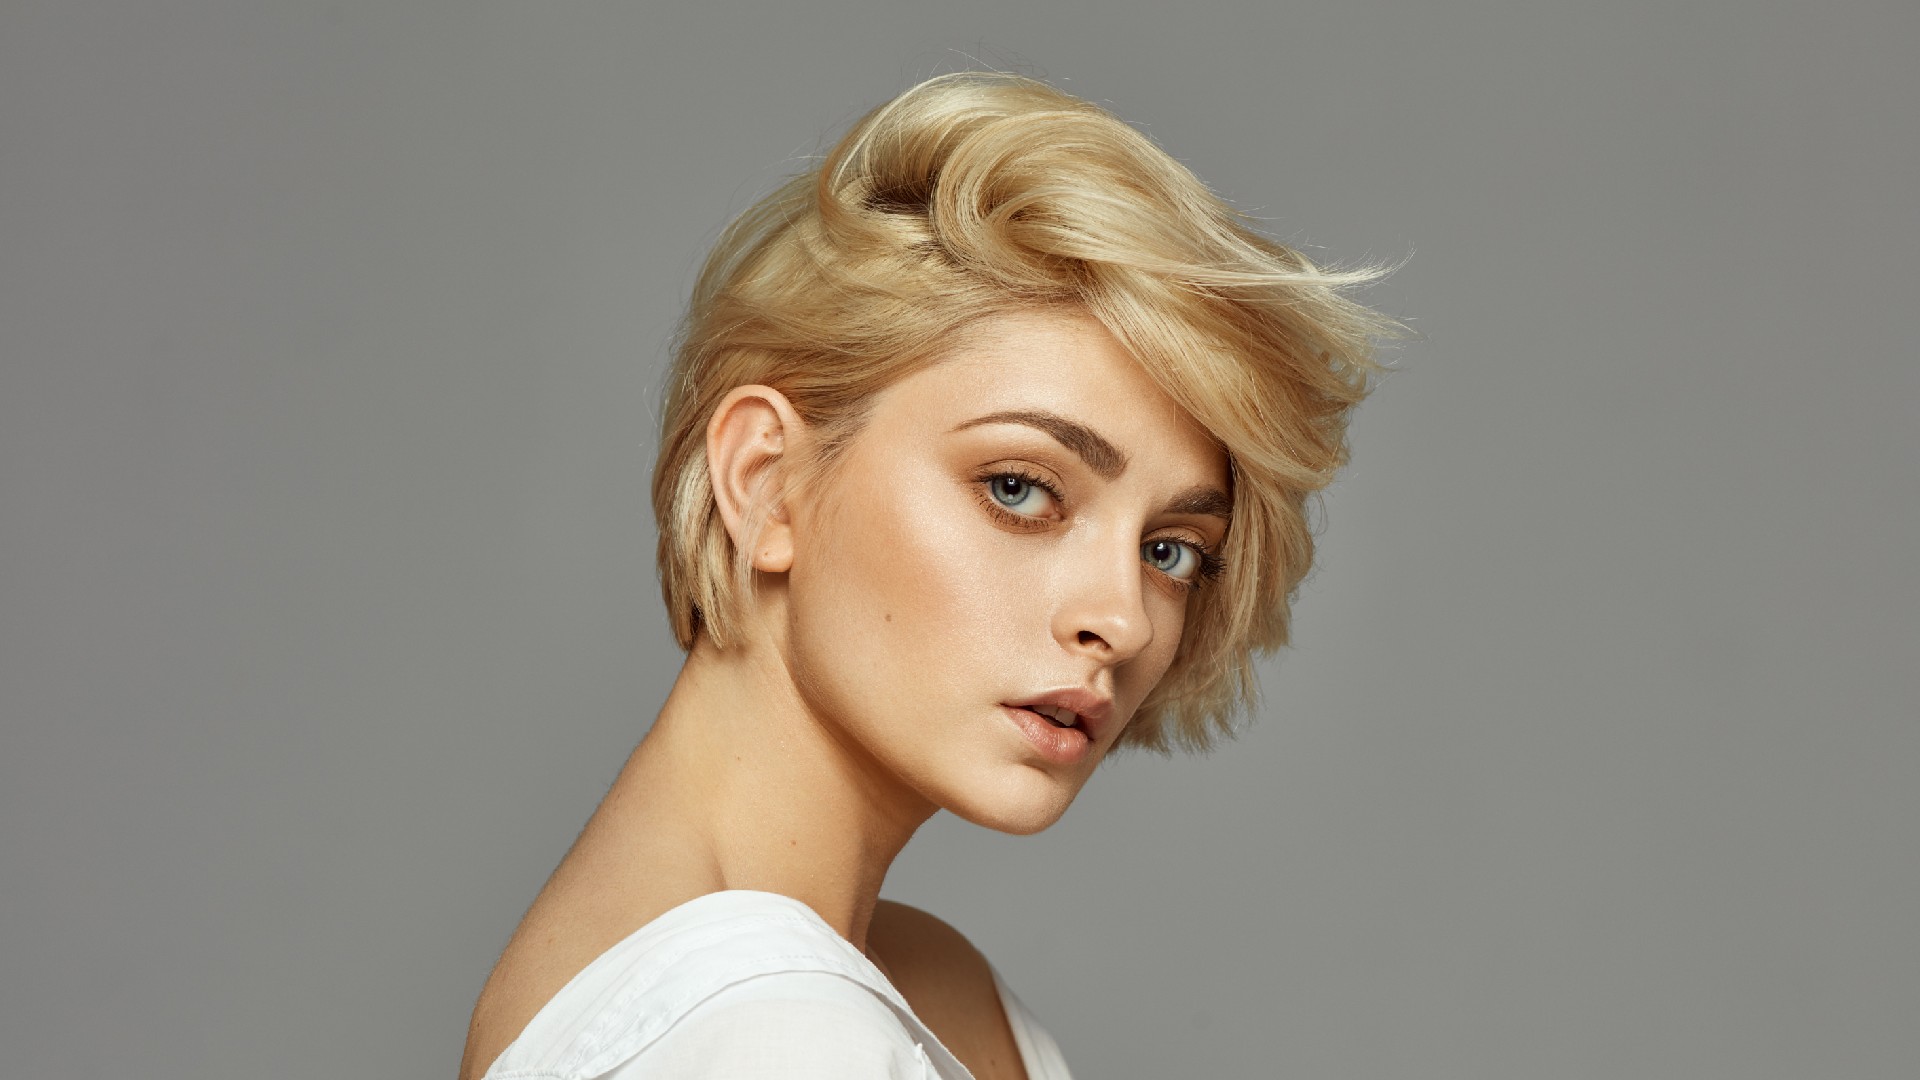 Want highlights in hair? Get inspired by our top looks | Woman & Home